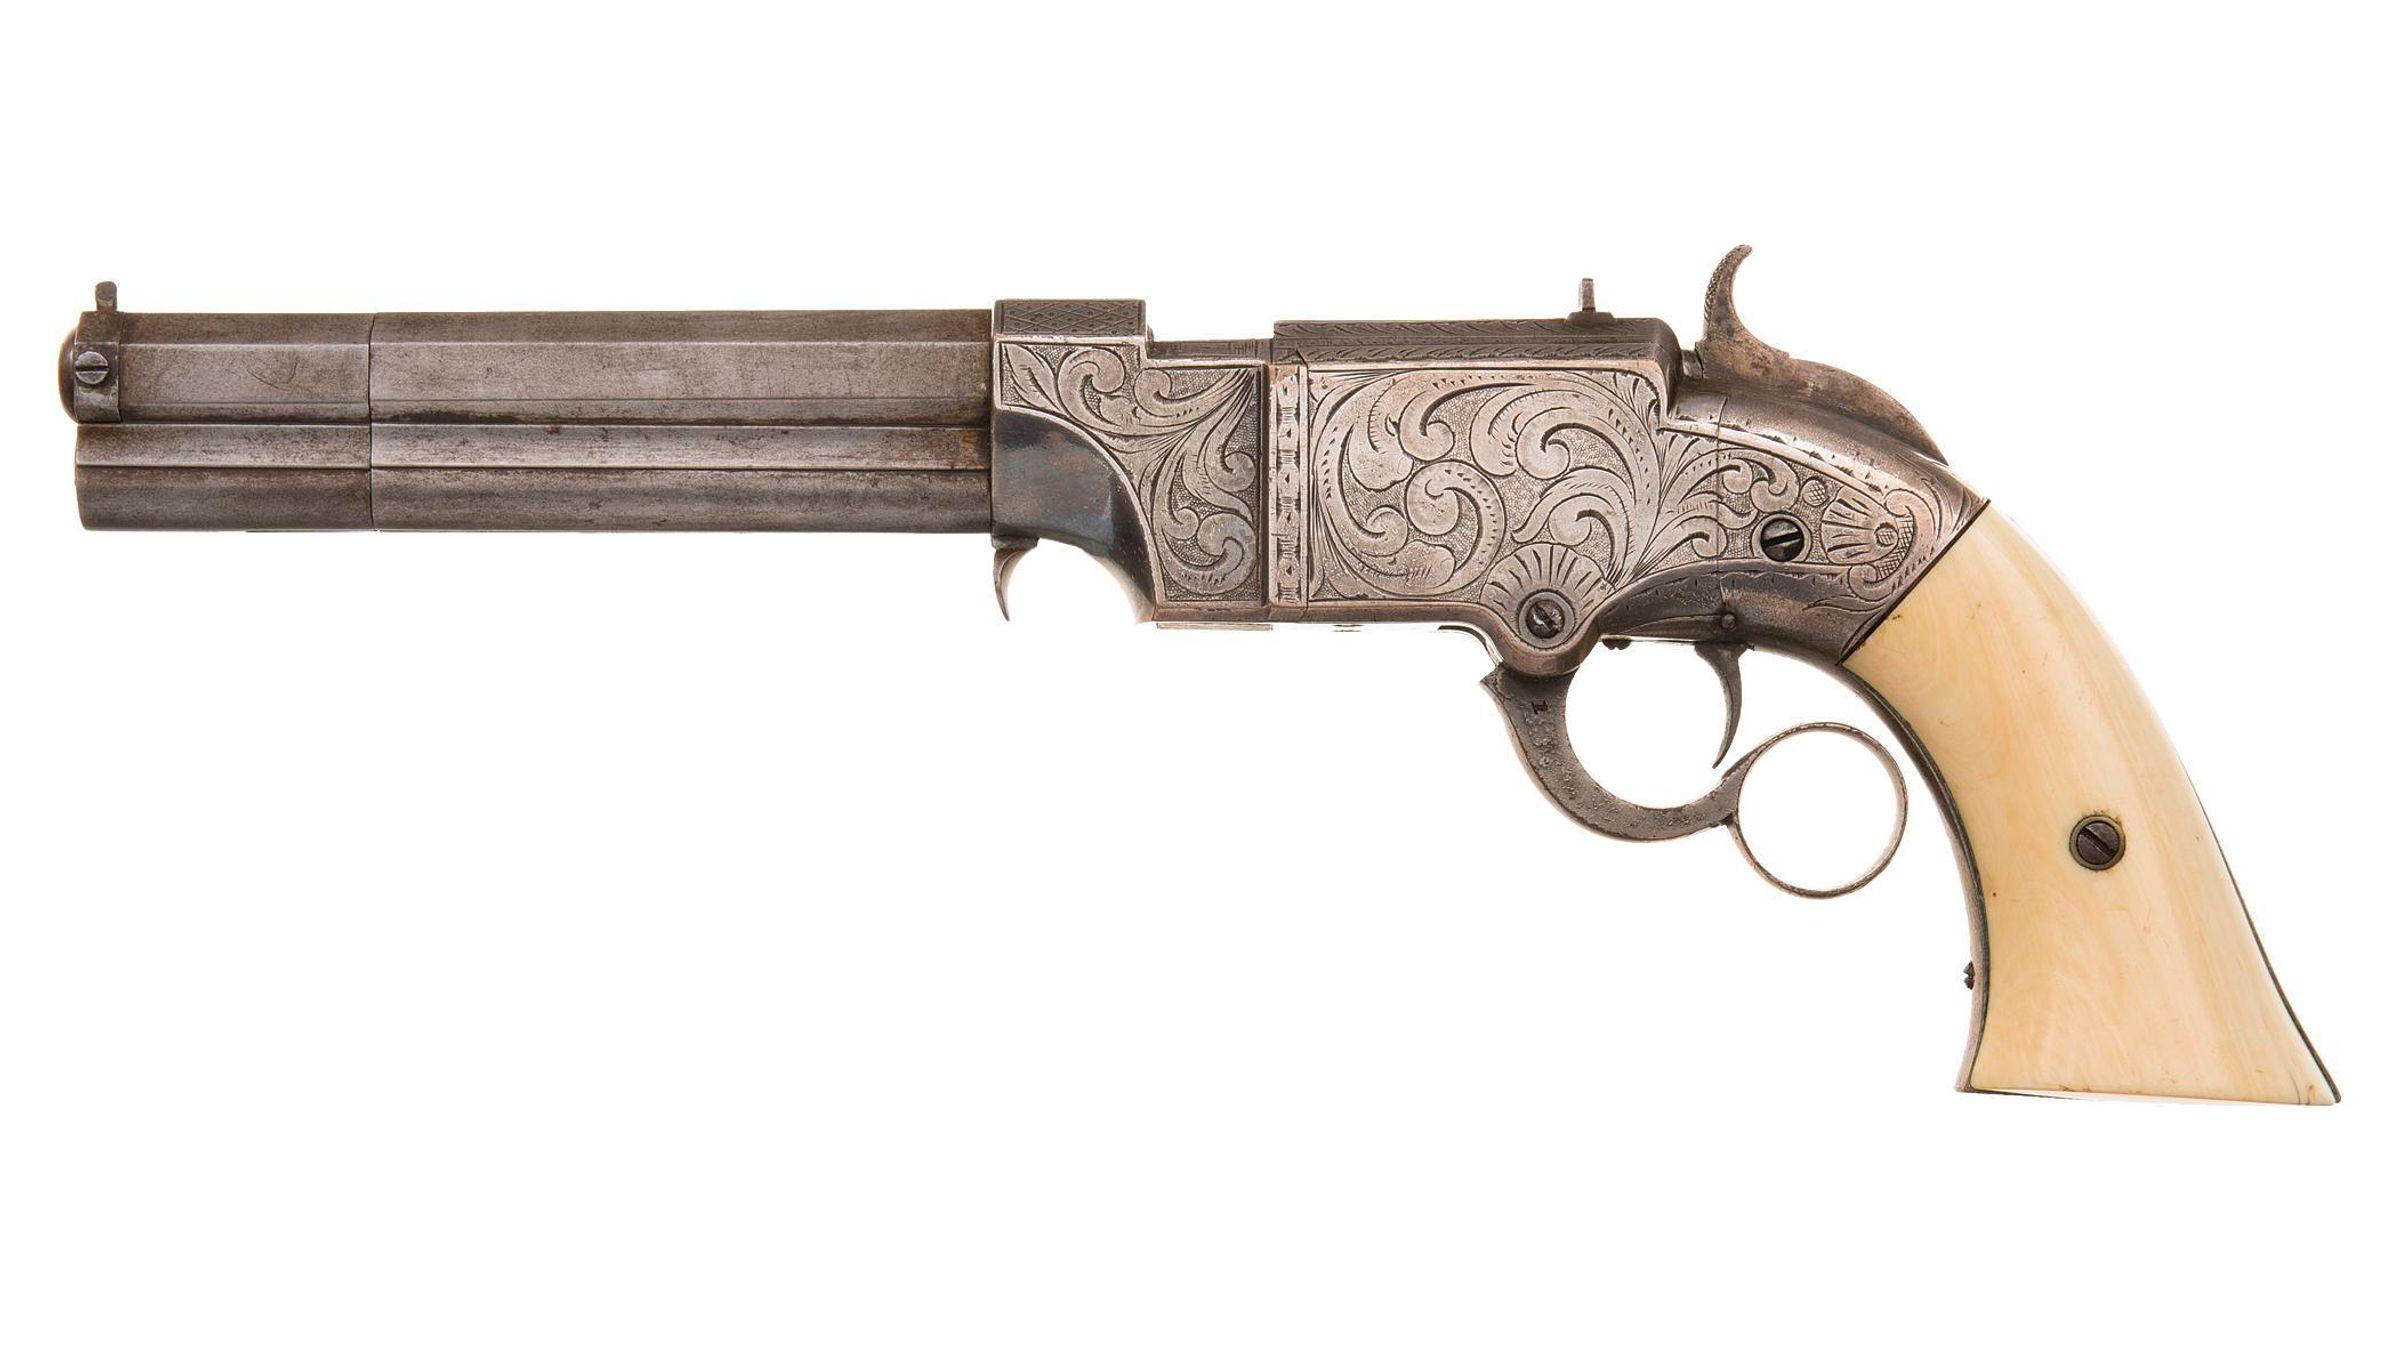 New Haven Arms Company Lever Action No. 2 Navy Pistol